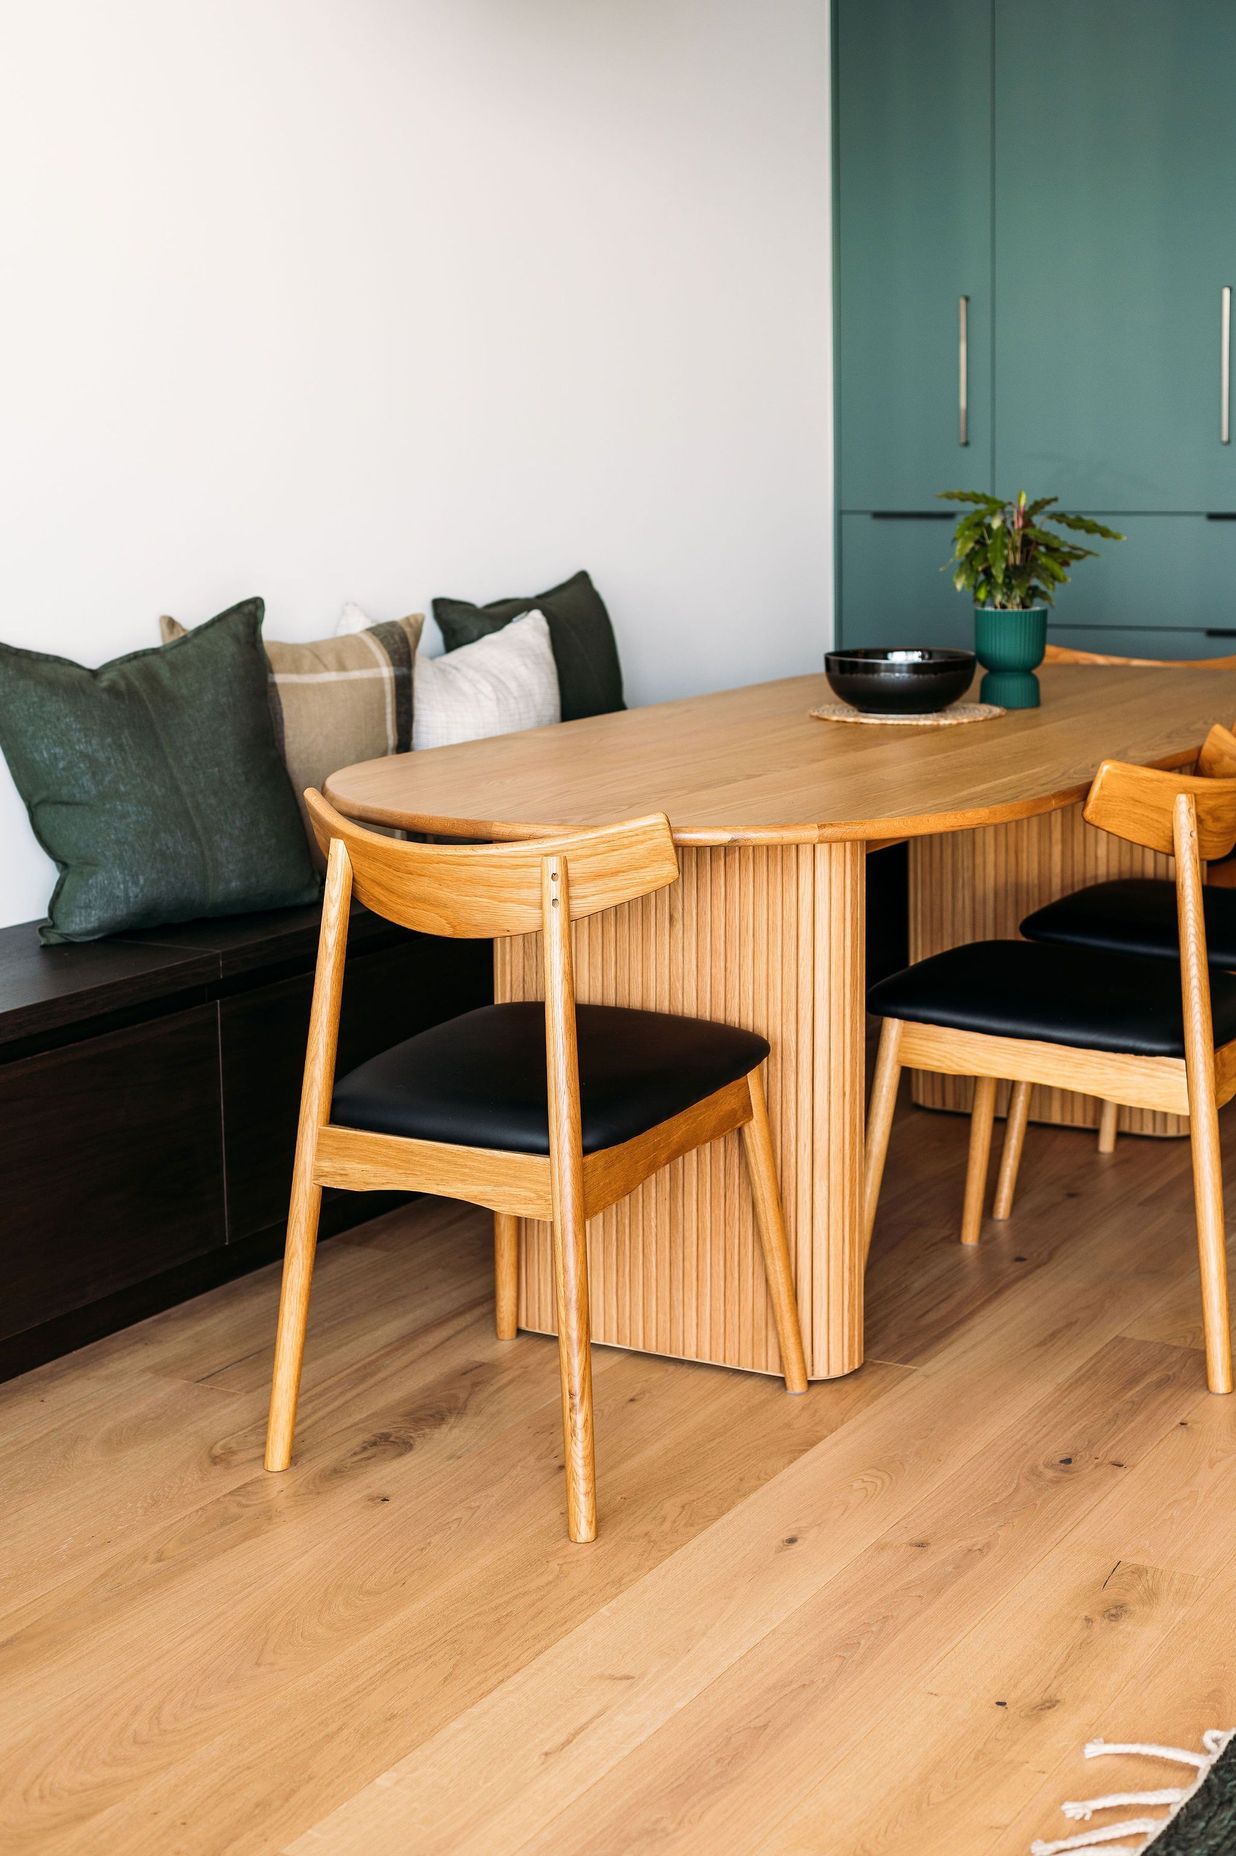 The dining table was chosen to allow it to be pushed right against the wall and allow more space when needed.